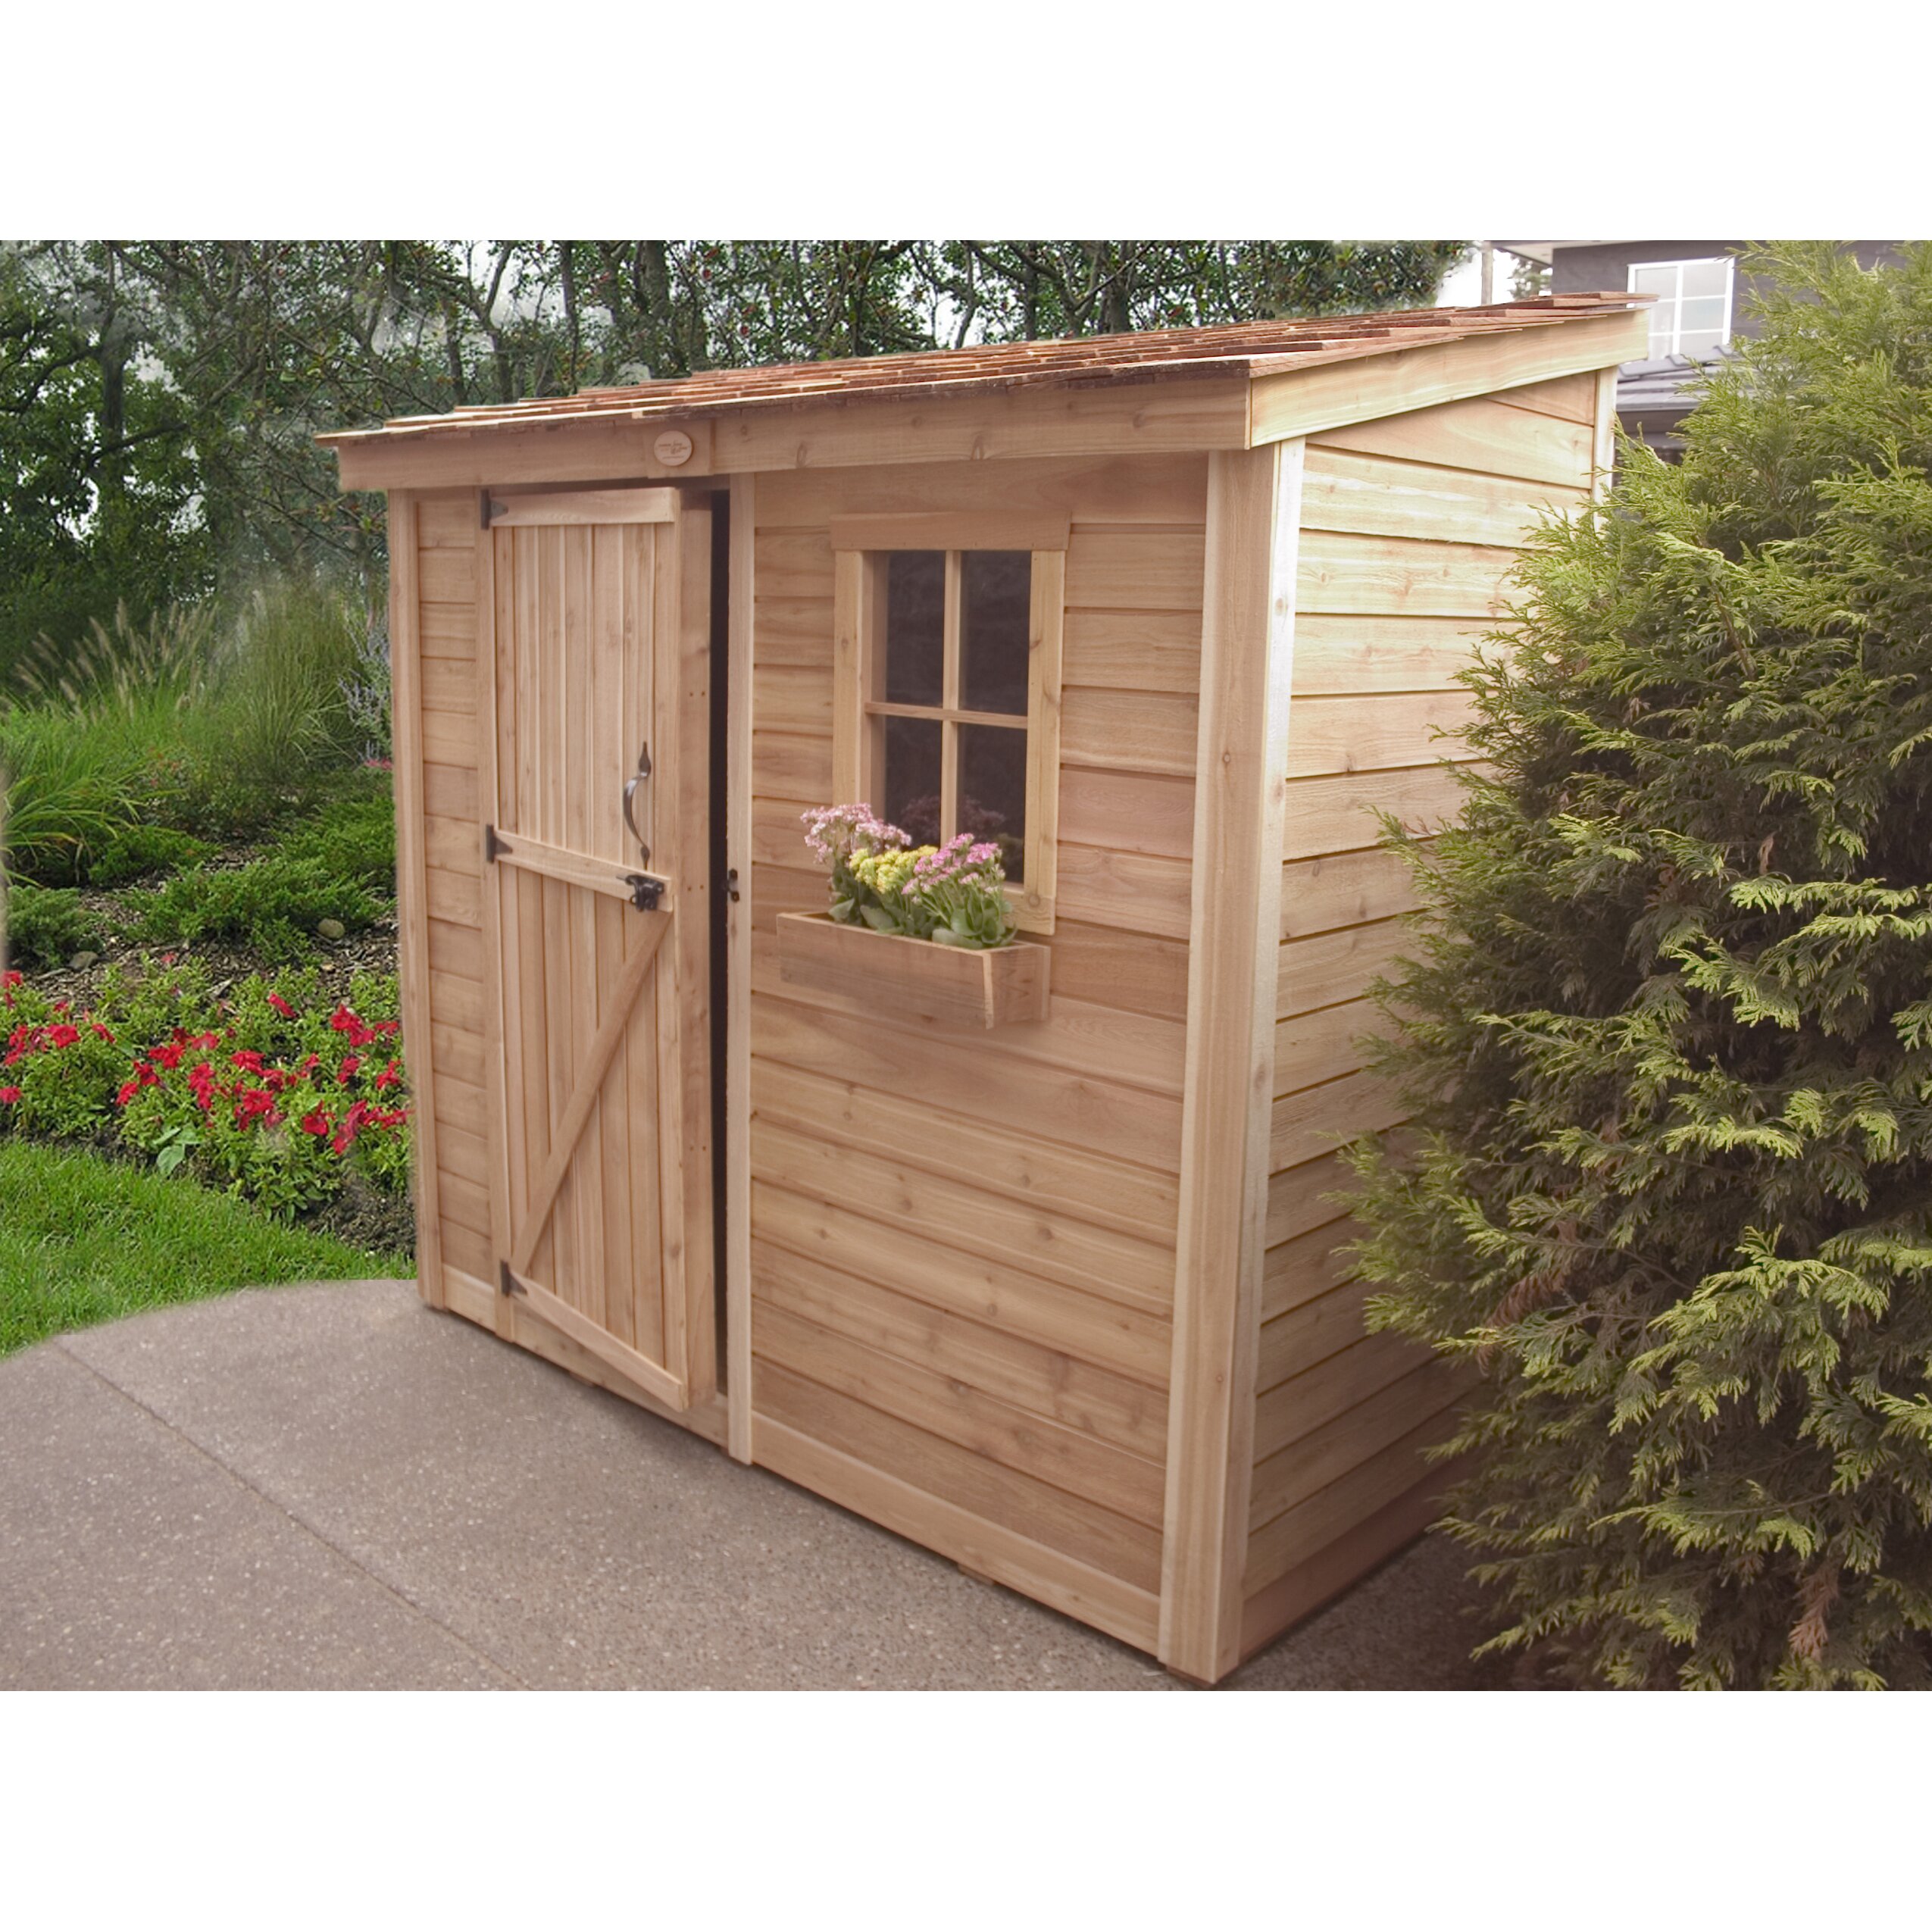 SpaceSaver 8 Ft. W x 4 Ft. D Wood Lean-To Shed Wayfair